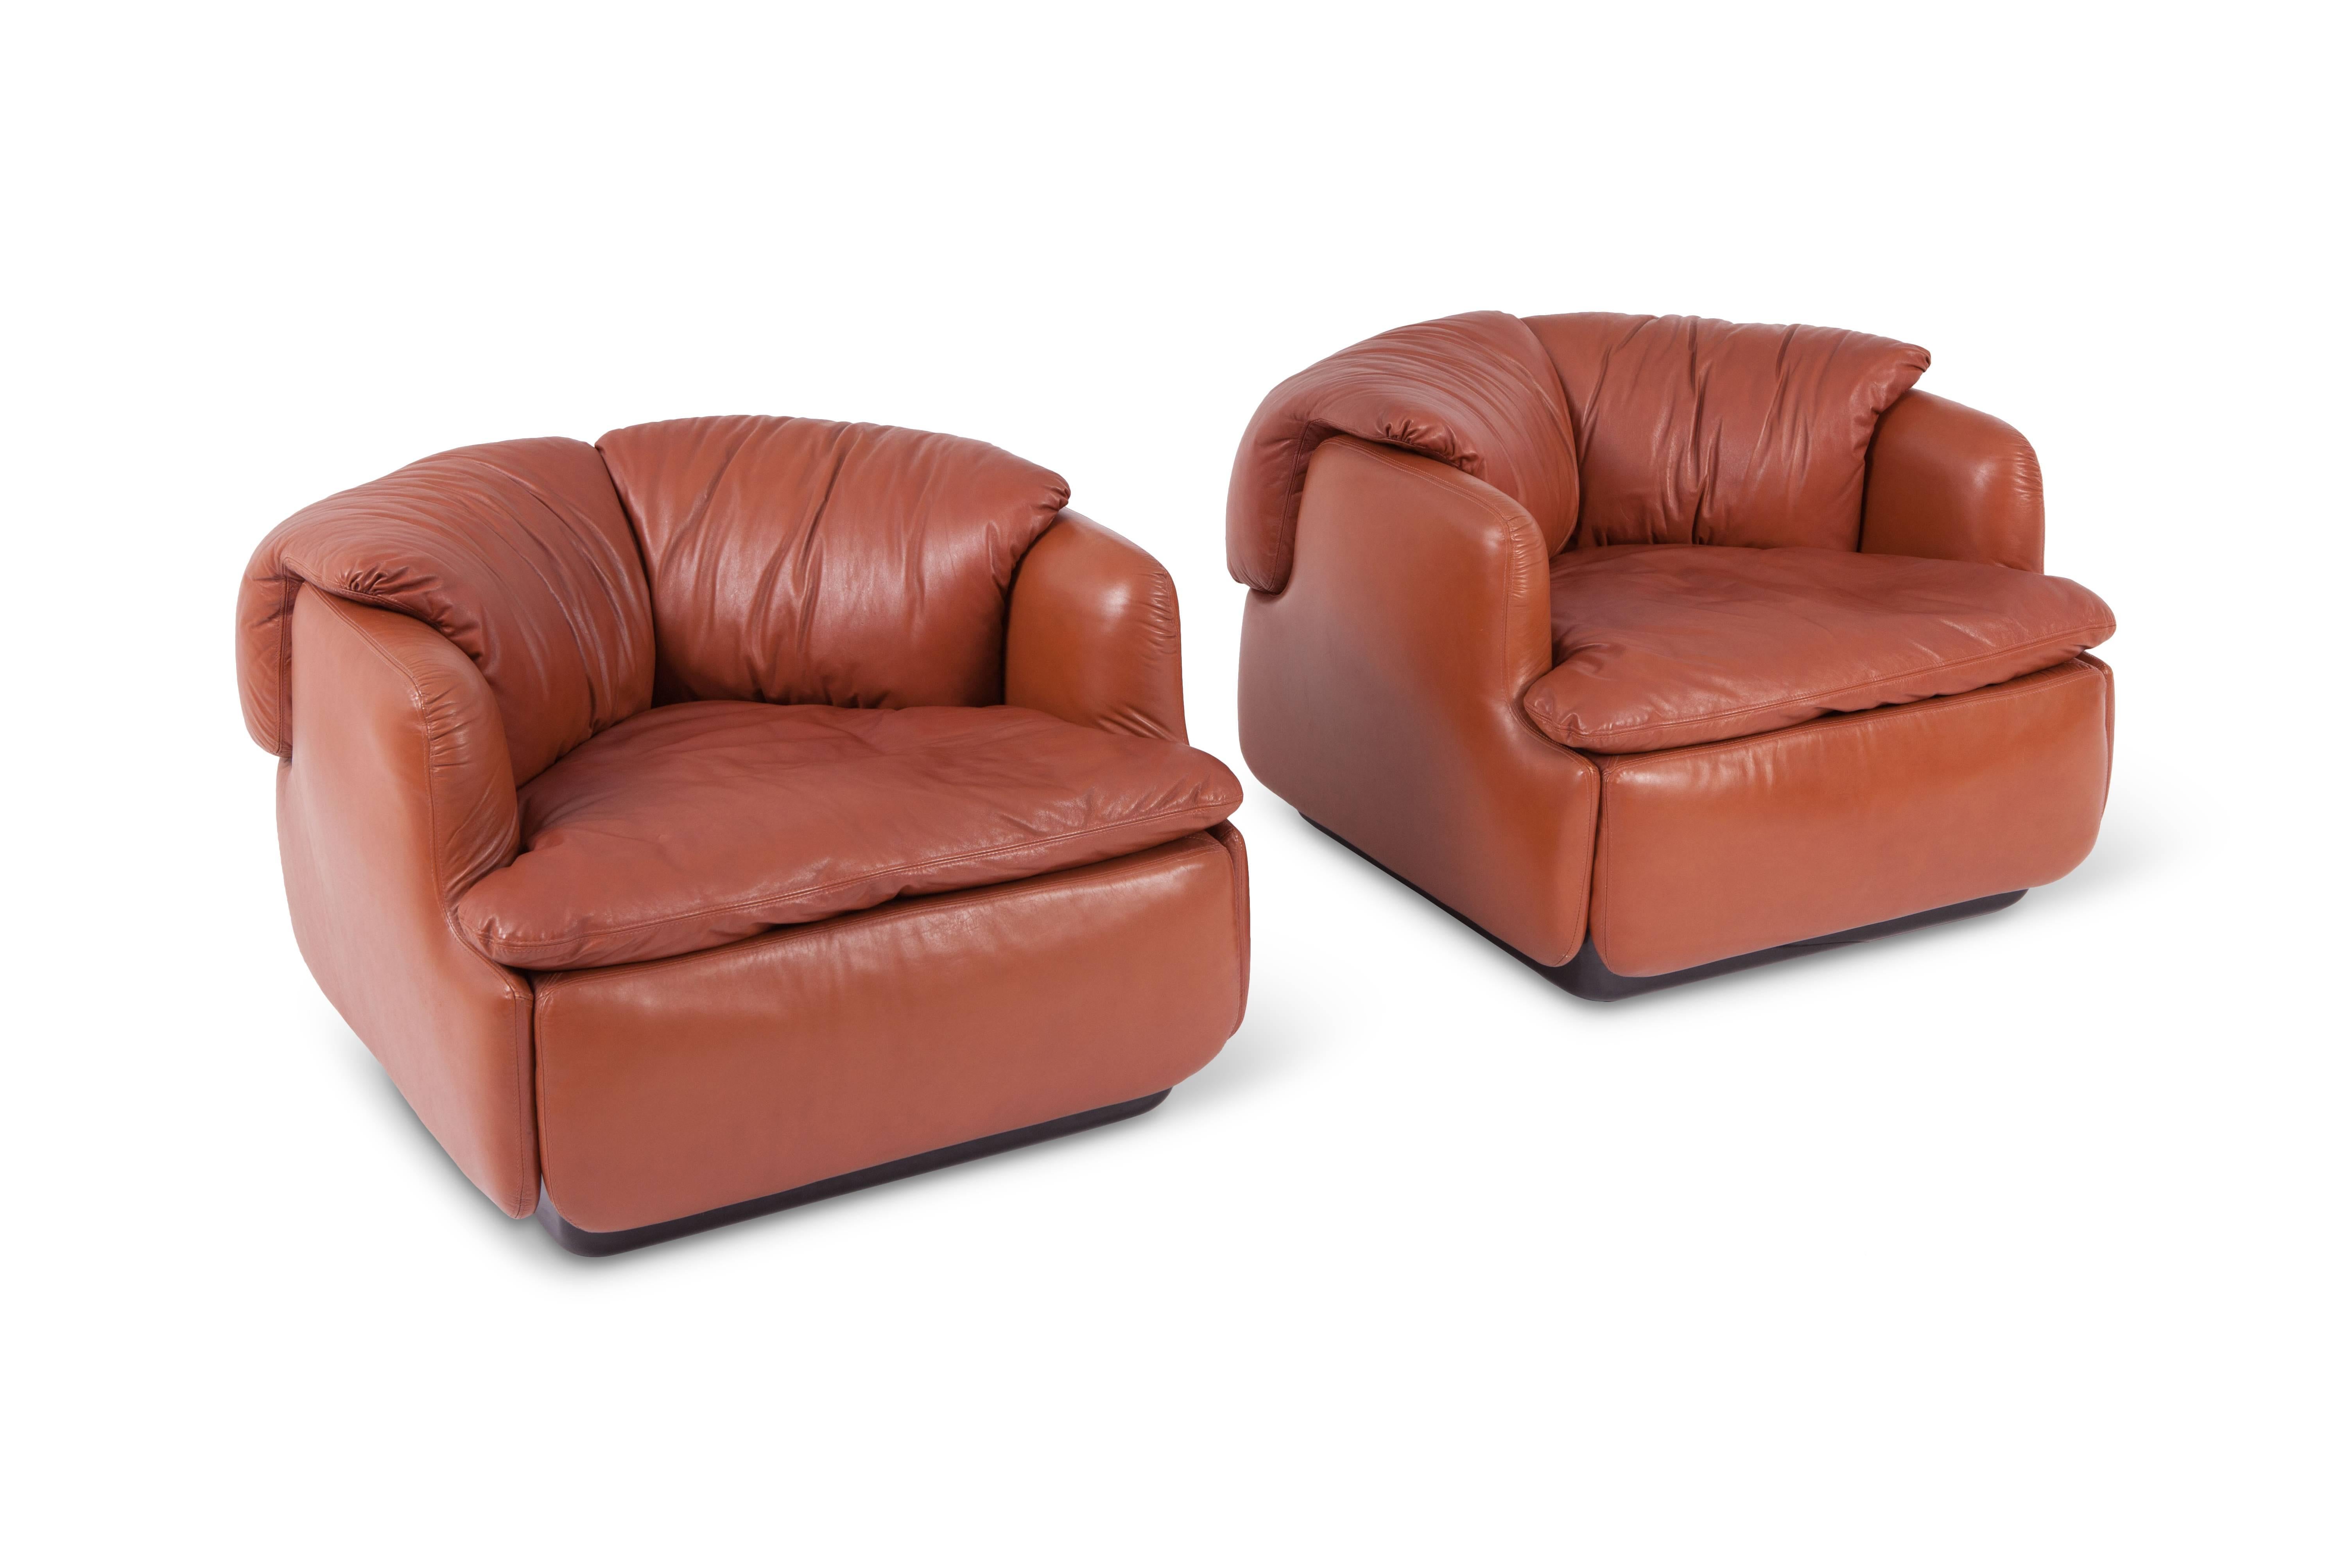 Iconic whiskey colored club chairs in high quality leather, designed by Italian architect Alberto Rosselli in 1972 for Saporiti Italia.

Measures: D 83, H 63, W 83, SH 42.5 cm.

 